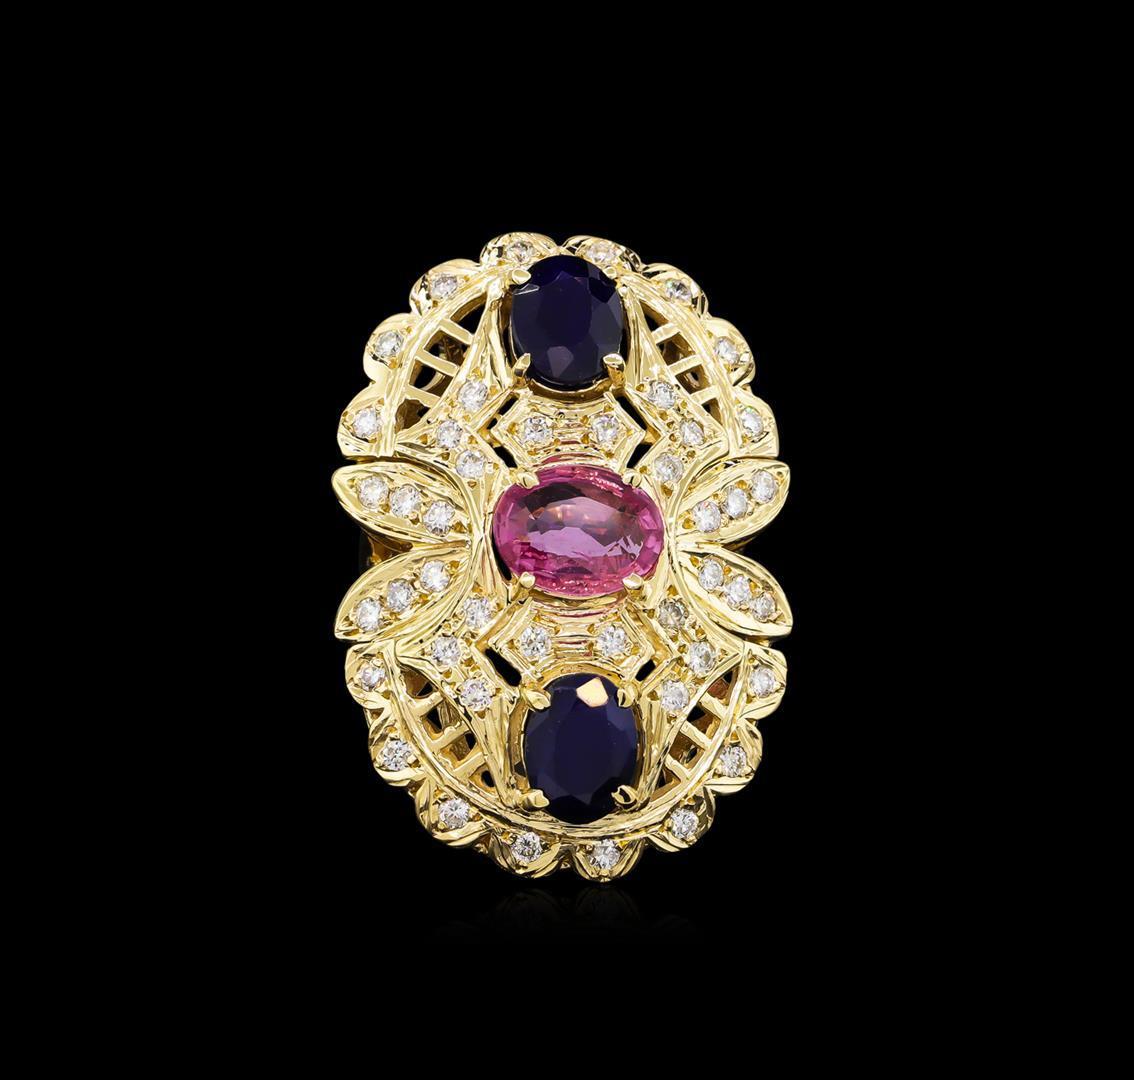 4.58 ctw Sapphire and Diamond Ring - 14KT Yellow Gold